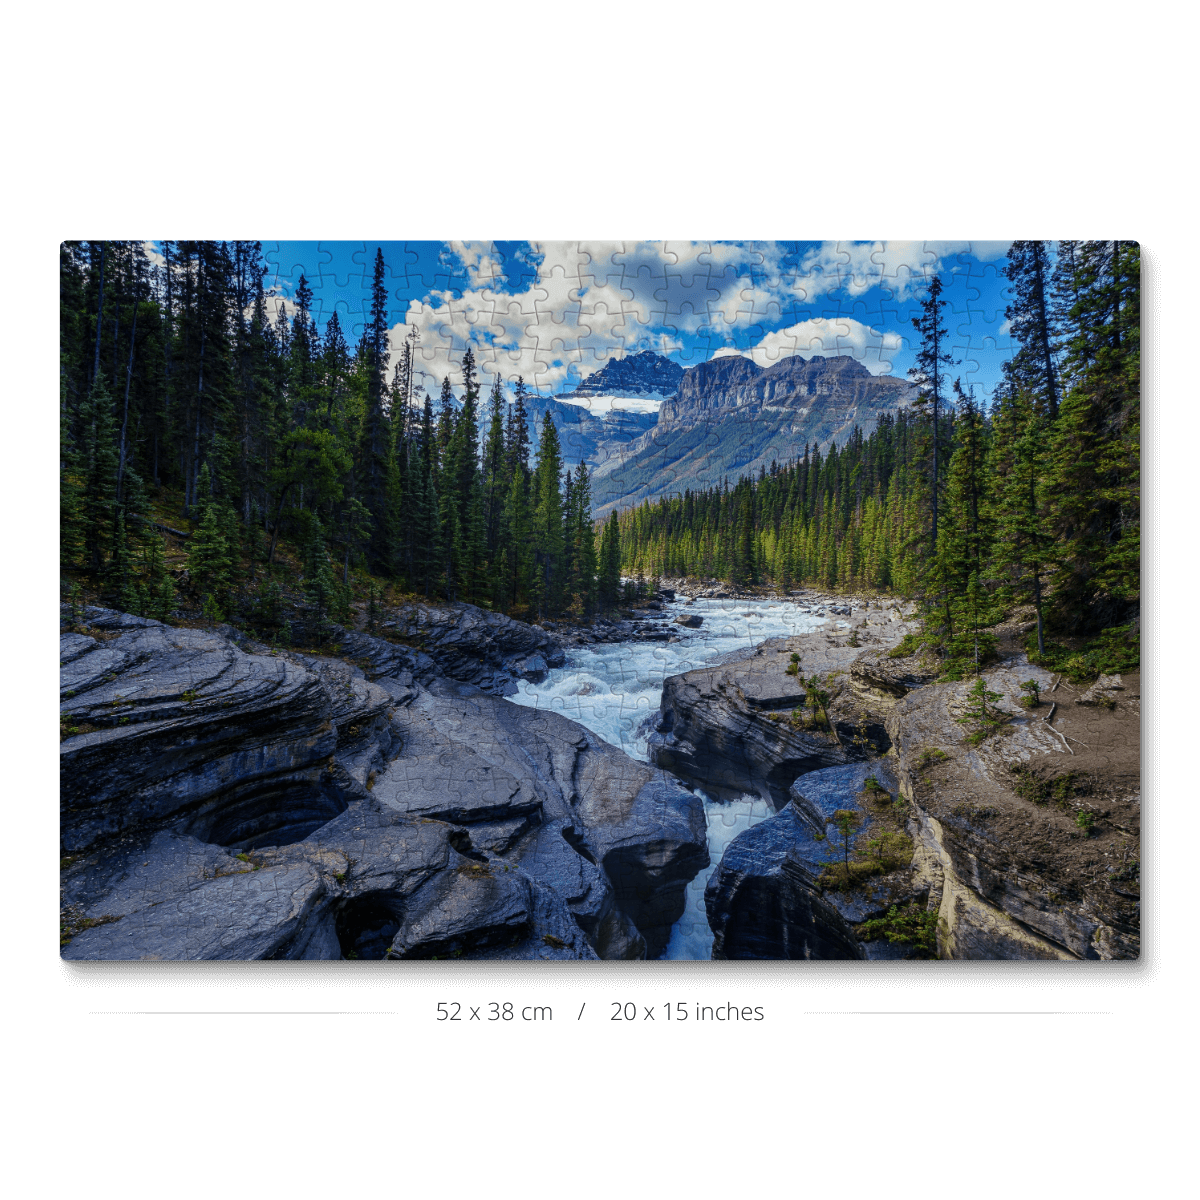 A 500-piece jigsaw puzzle featuring a photo of Mistaya River in Banff National Park.